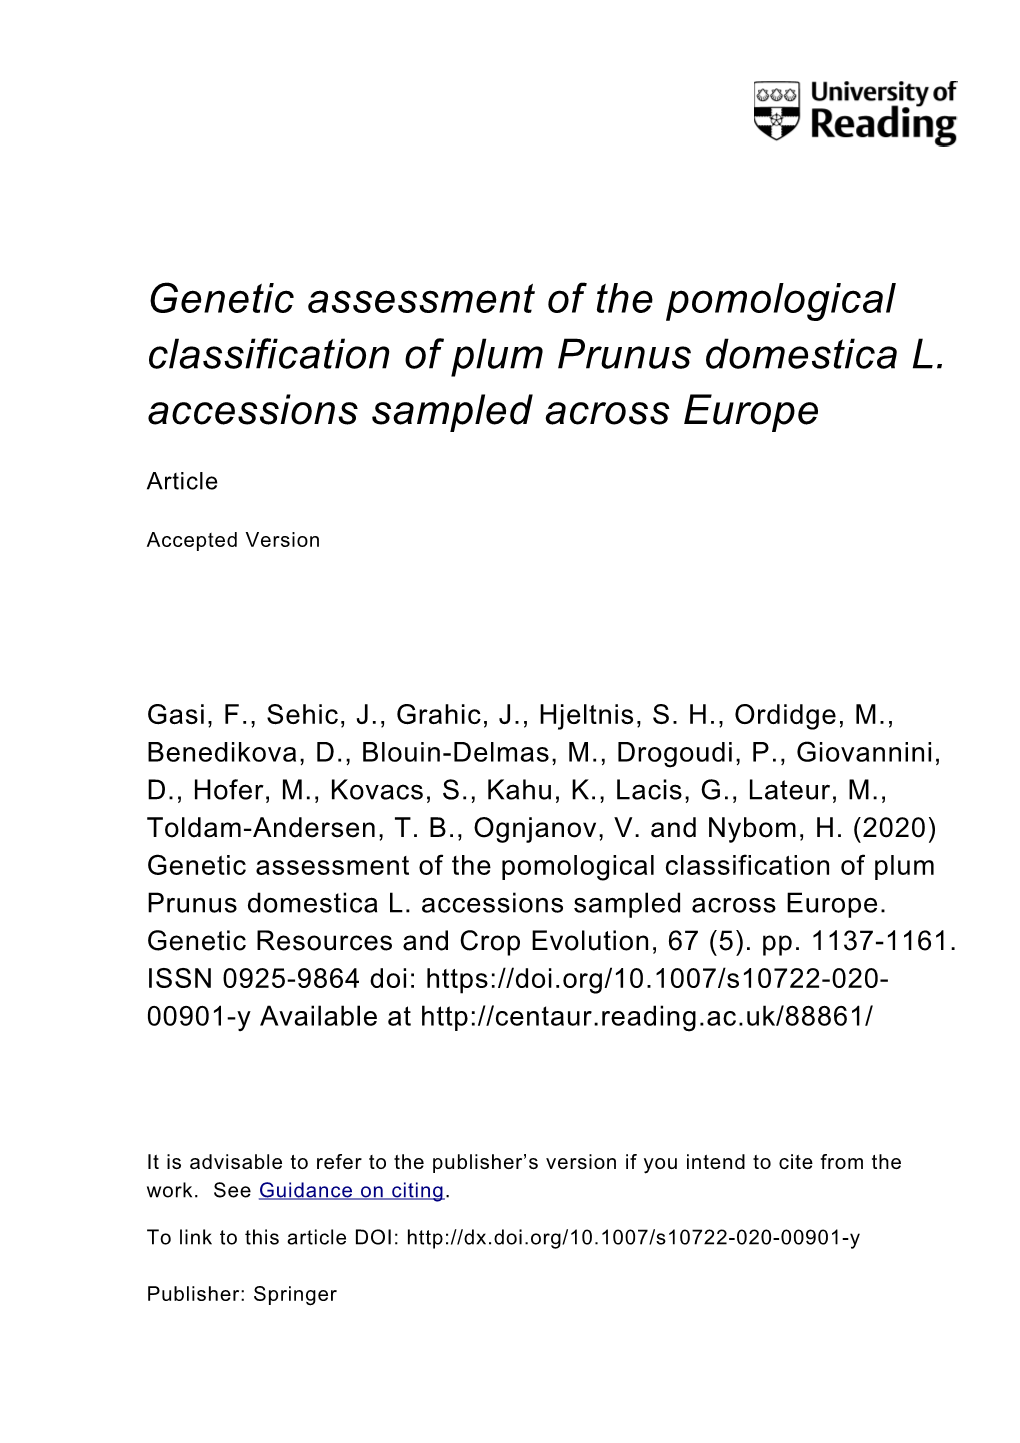 Genetic Assessment of the Pomological Classification of Plum Prunus Domestica L